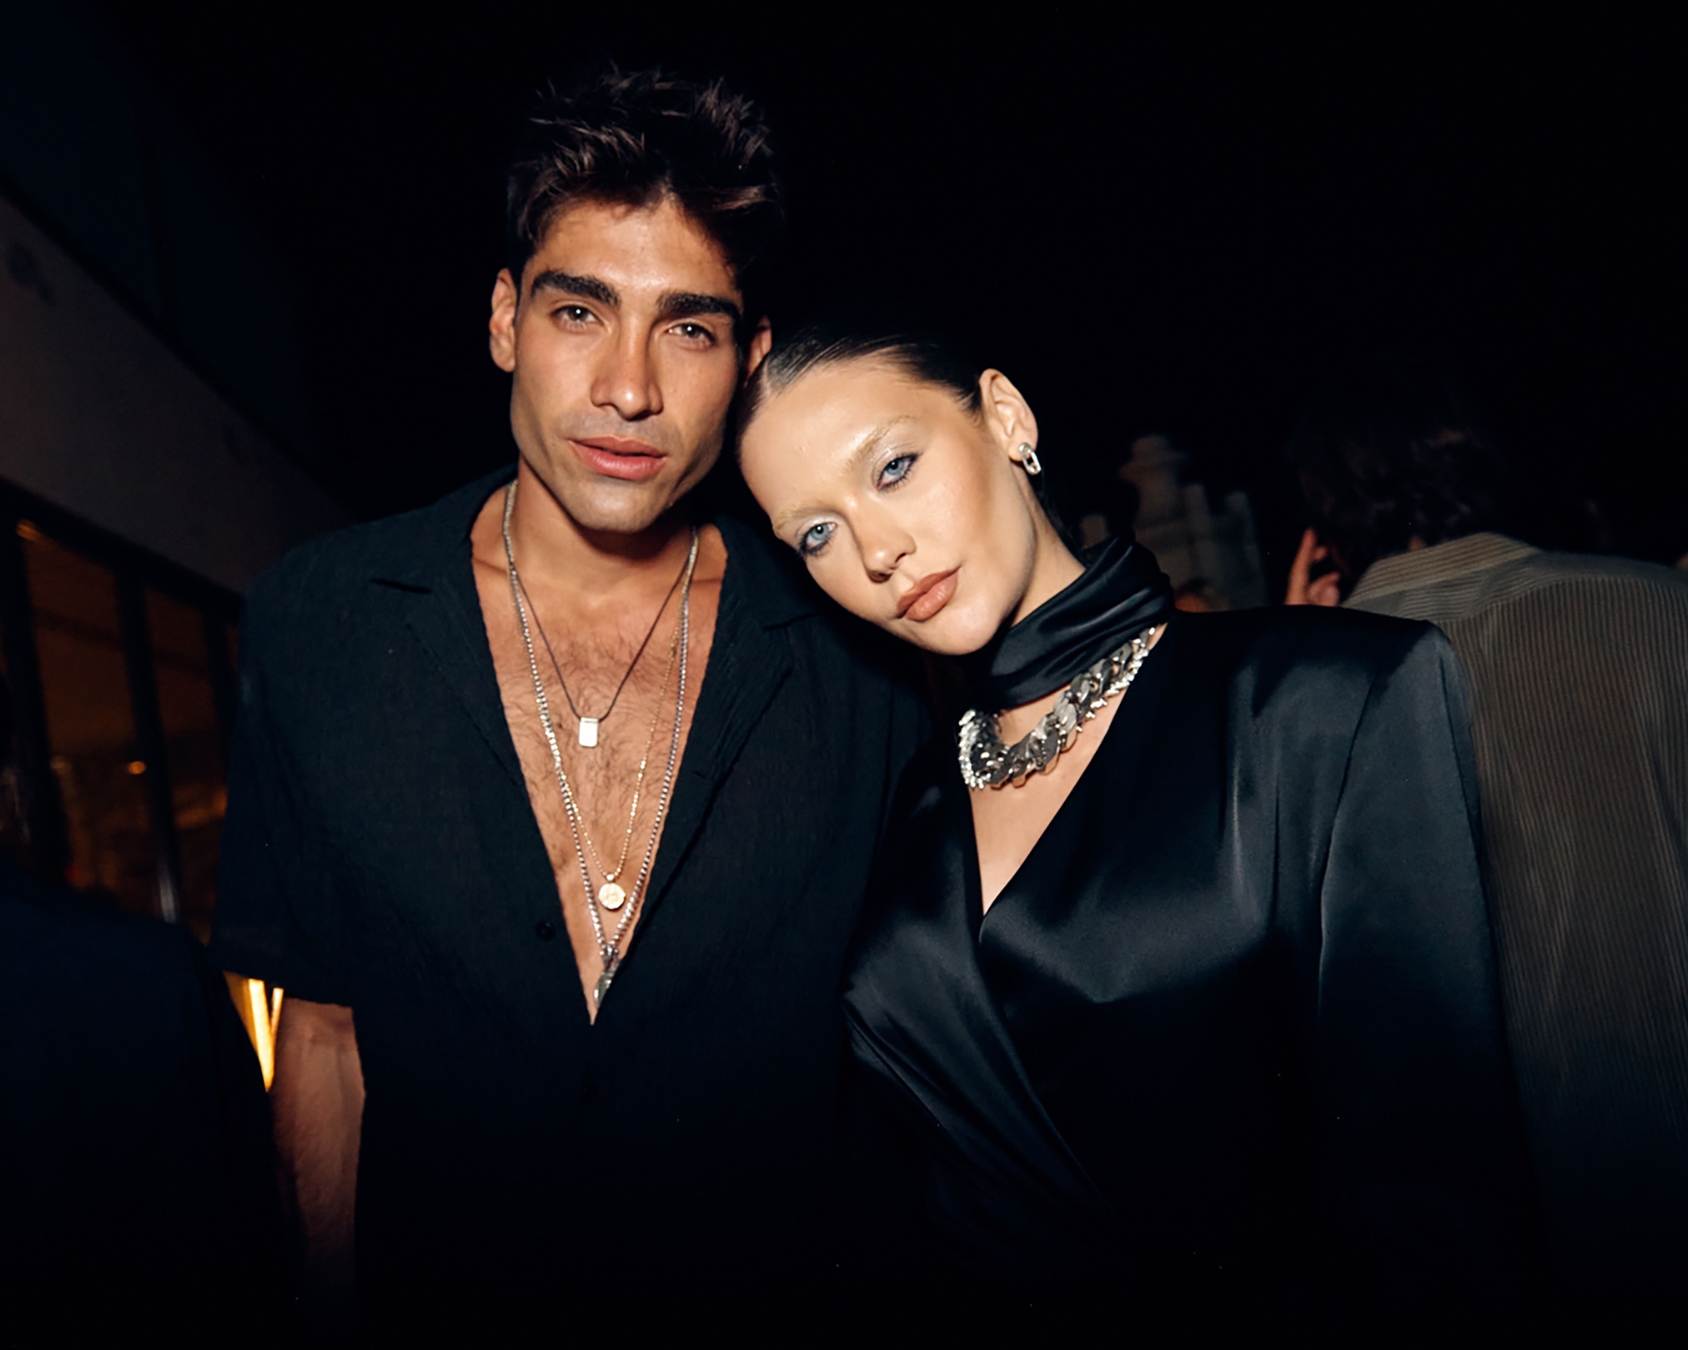 GIVENCHY NYFW PARTY